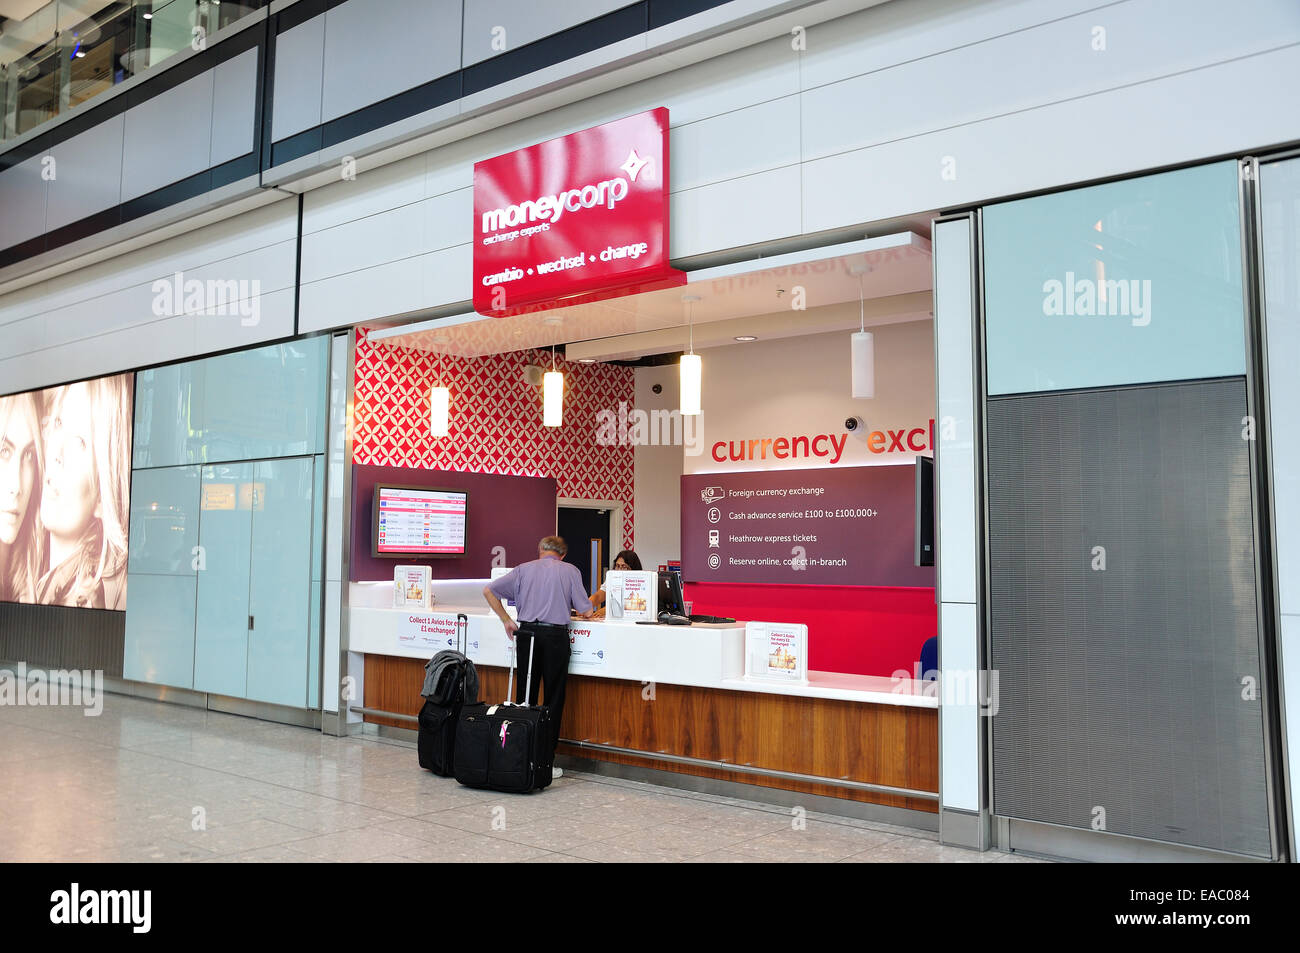 Moneycorp currency change, Terminal 5, Heathrow Airport. Hounslow, Greater London, England, United Kingdom Stock Photo